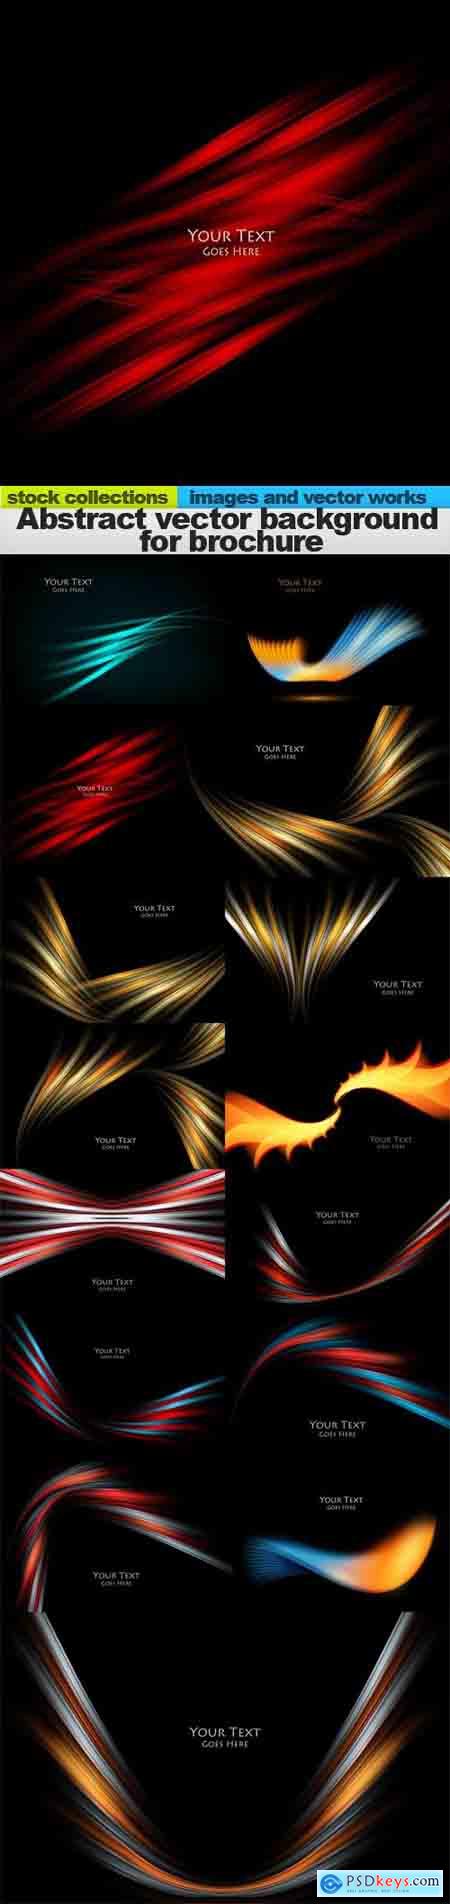 Abstract vector background for brochure, 15 x EPS